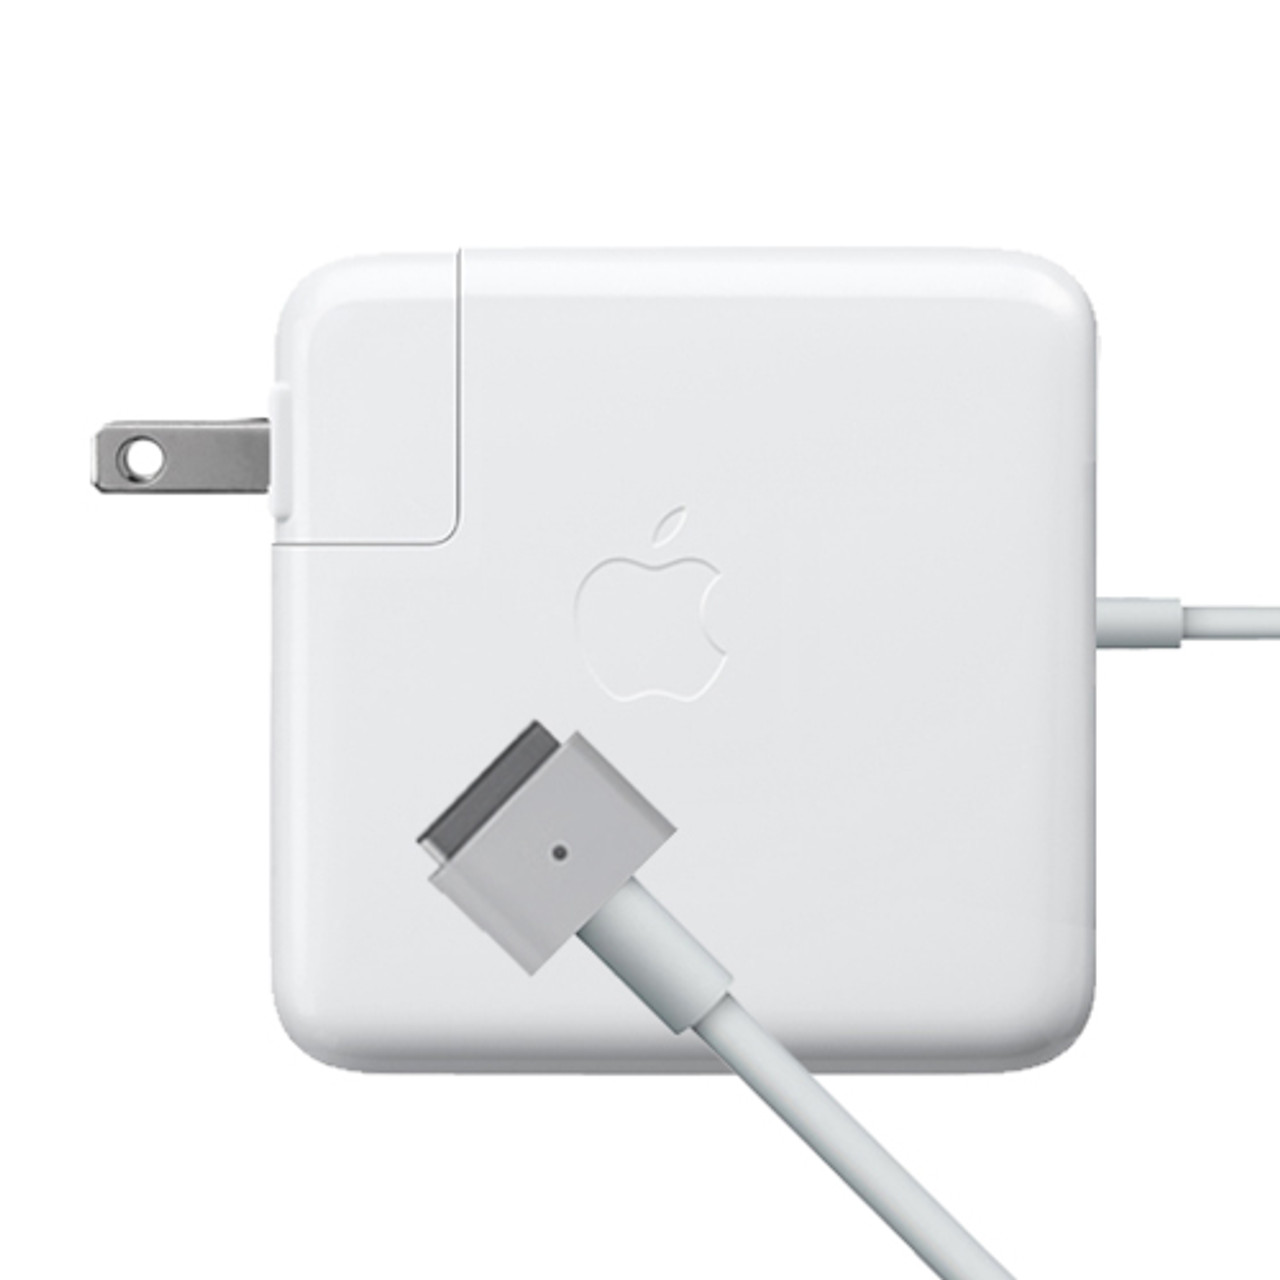 MagSafe 2 Power Adapter compatible with Mid 2012-Mid 2015 MacBook pro Retina display